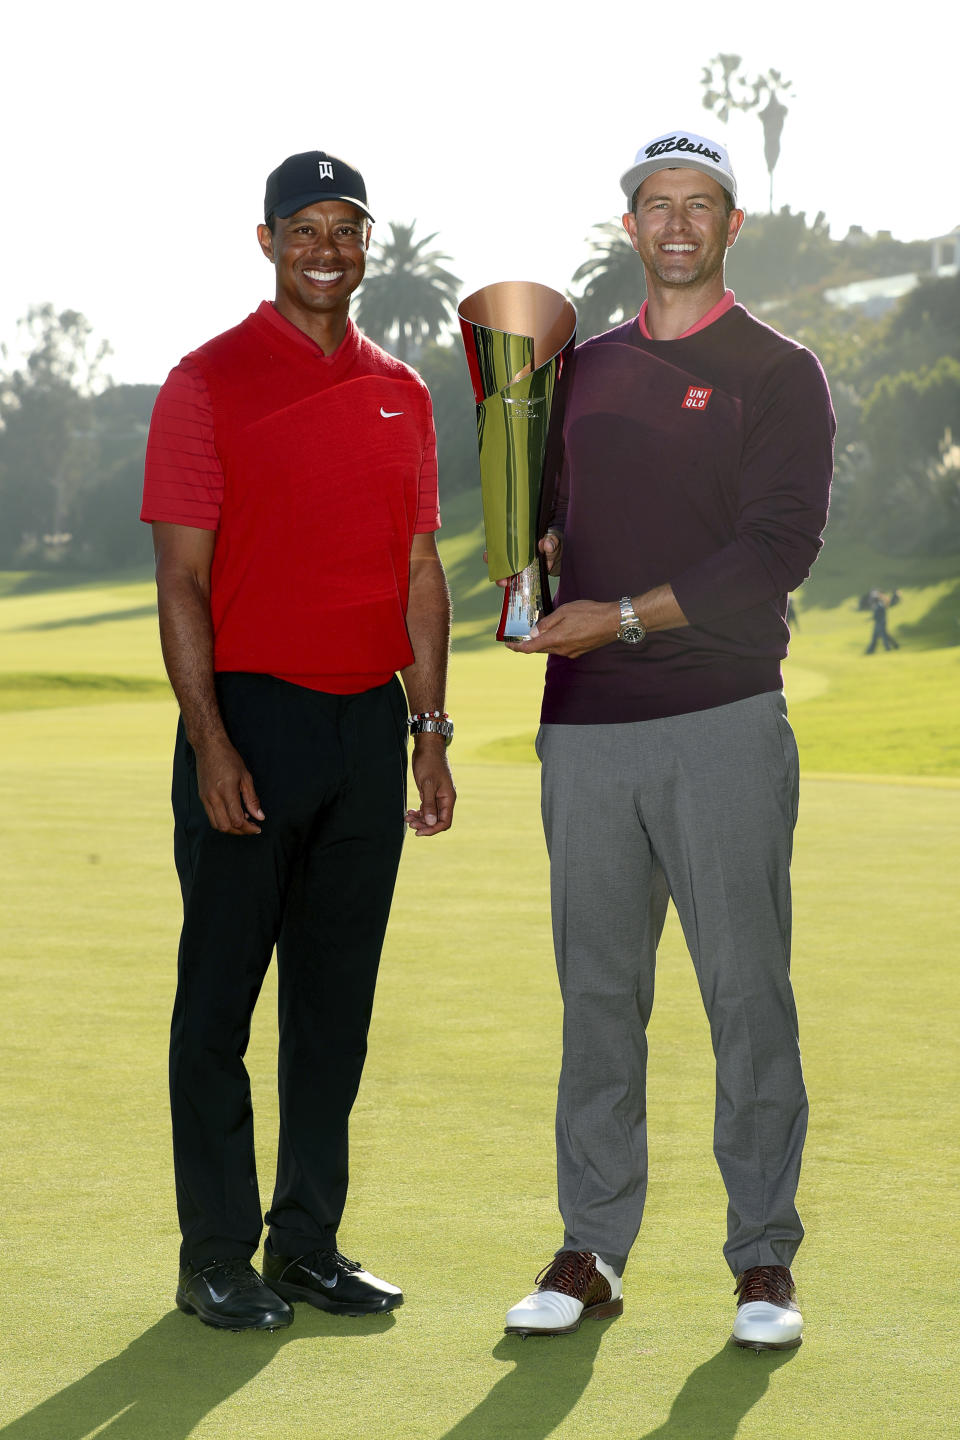 Adam Scott, right, of Australia, poses with his trophy next to Tiger Woods on the 18th green after winning the Genesis Invitational golf tournament at Riviera Country Club, Sunday, Feb. 16, 2020, in the Pacific Palisades area of Los Angeles. (AP Photo/Ryan Kang)